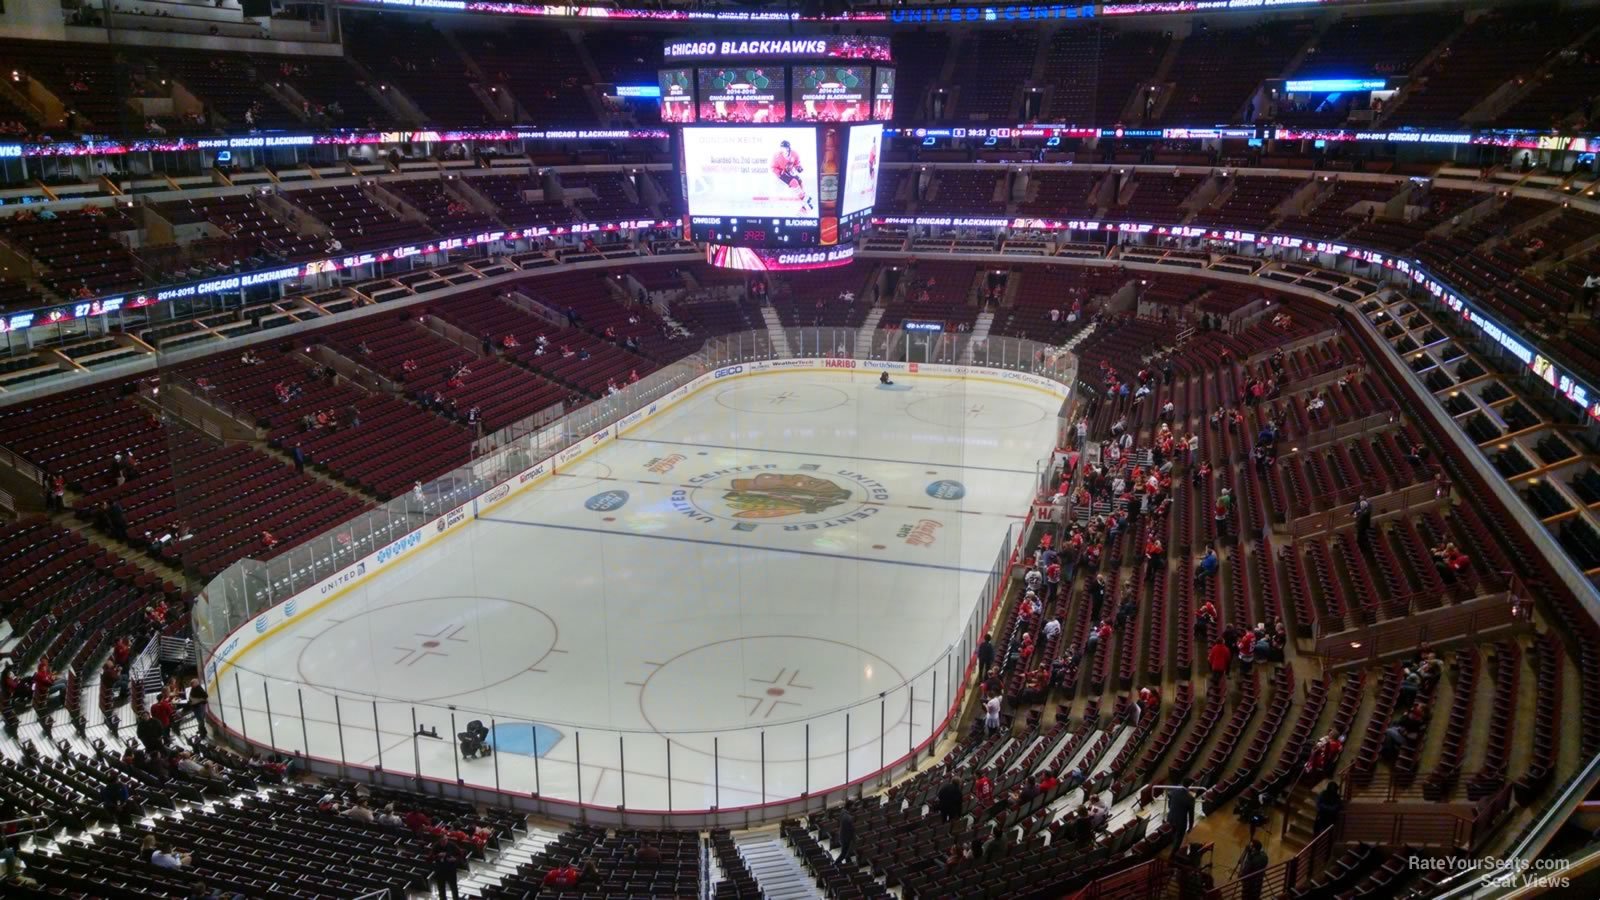 11/27 - Seat View From Section 307, Row 2.